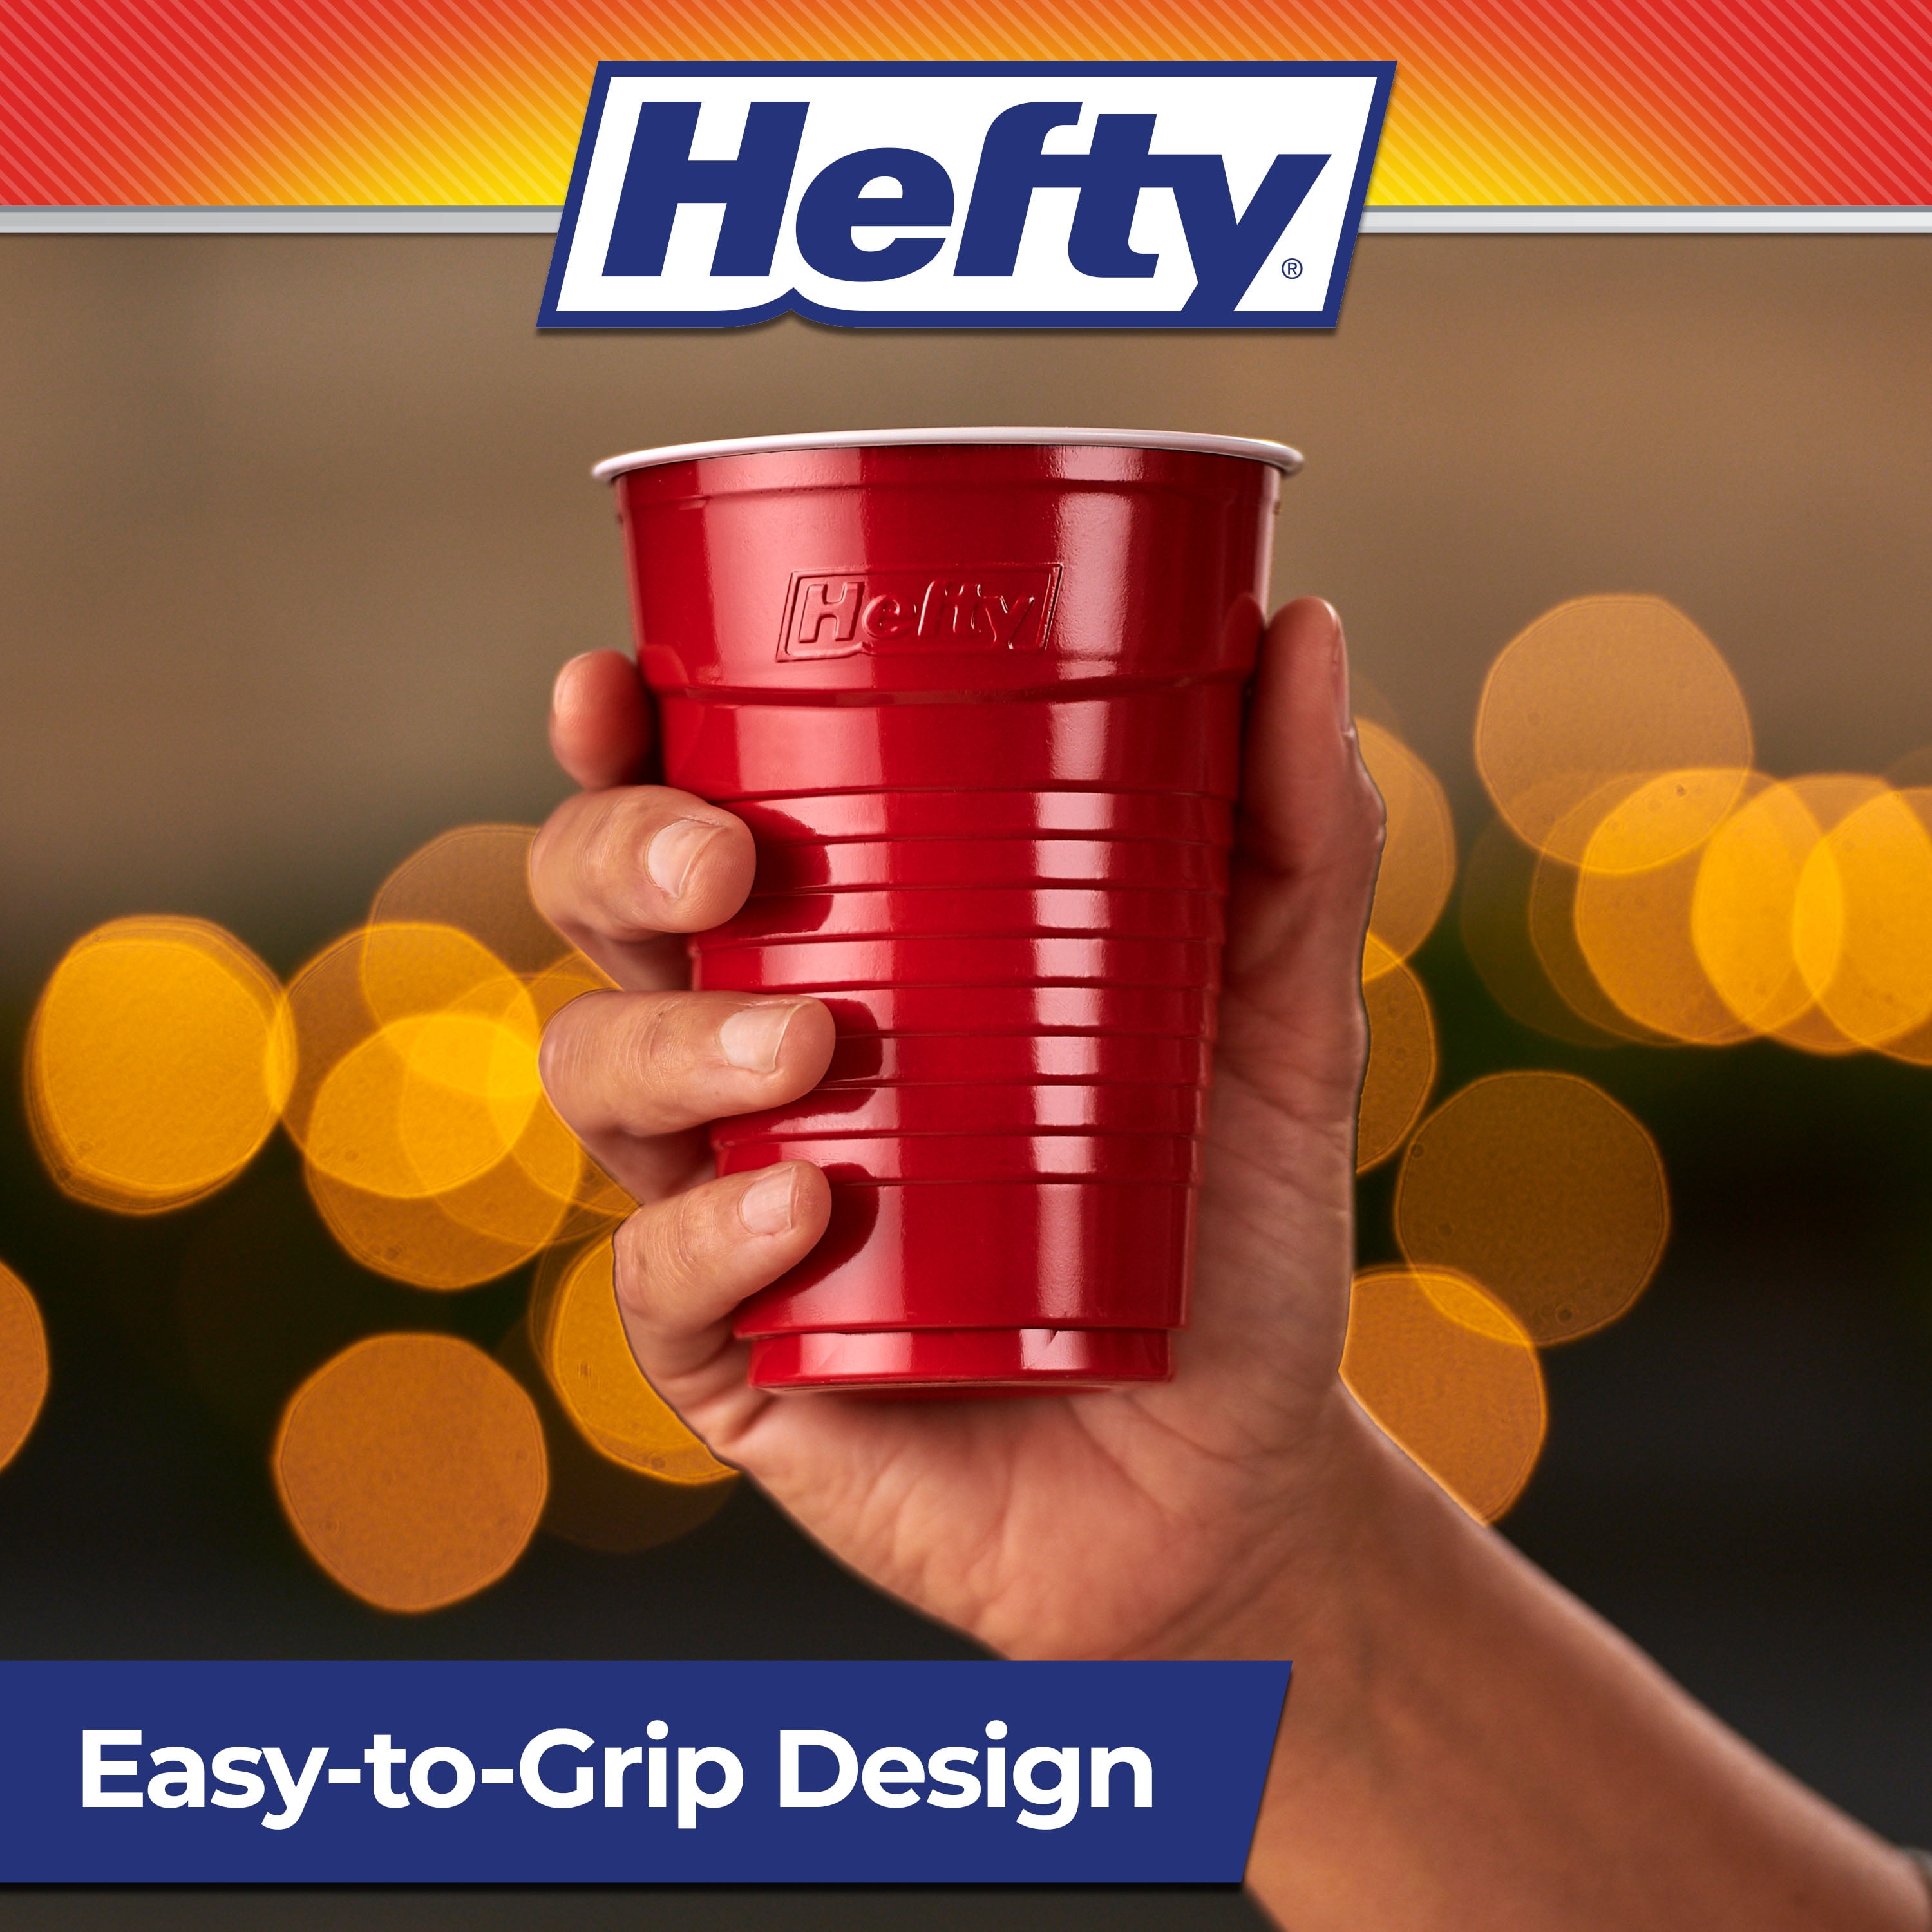 Hefty TKctPv Plastic Party Cups, Assorted Colors, 16 Ounce, 100 Count